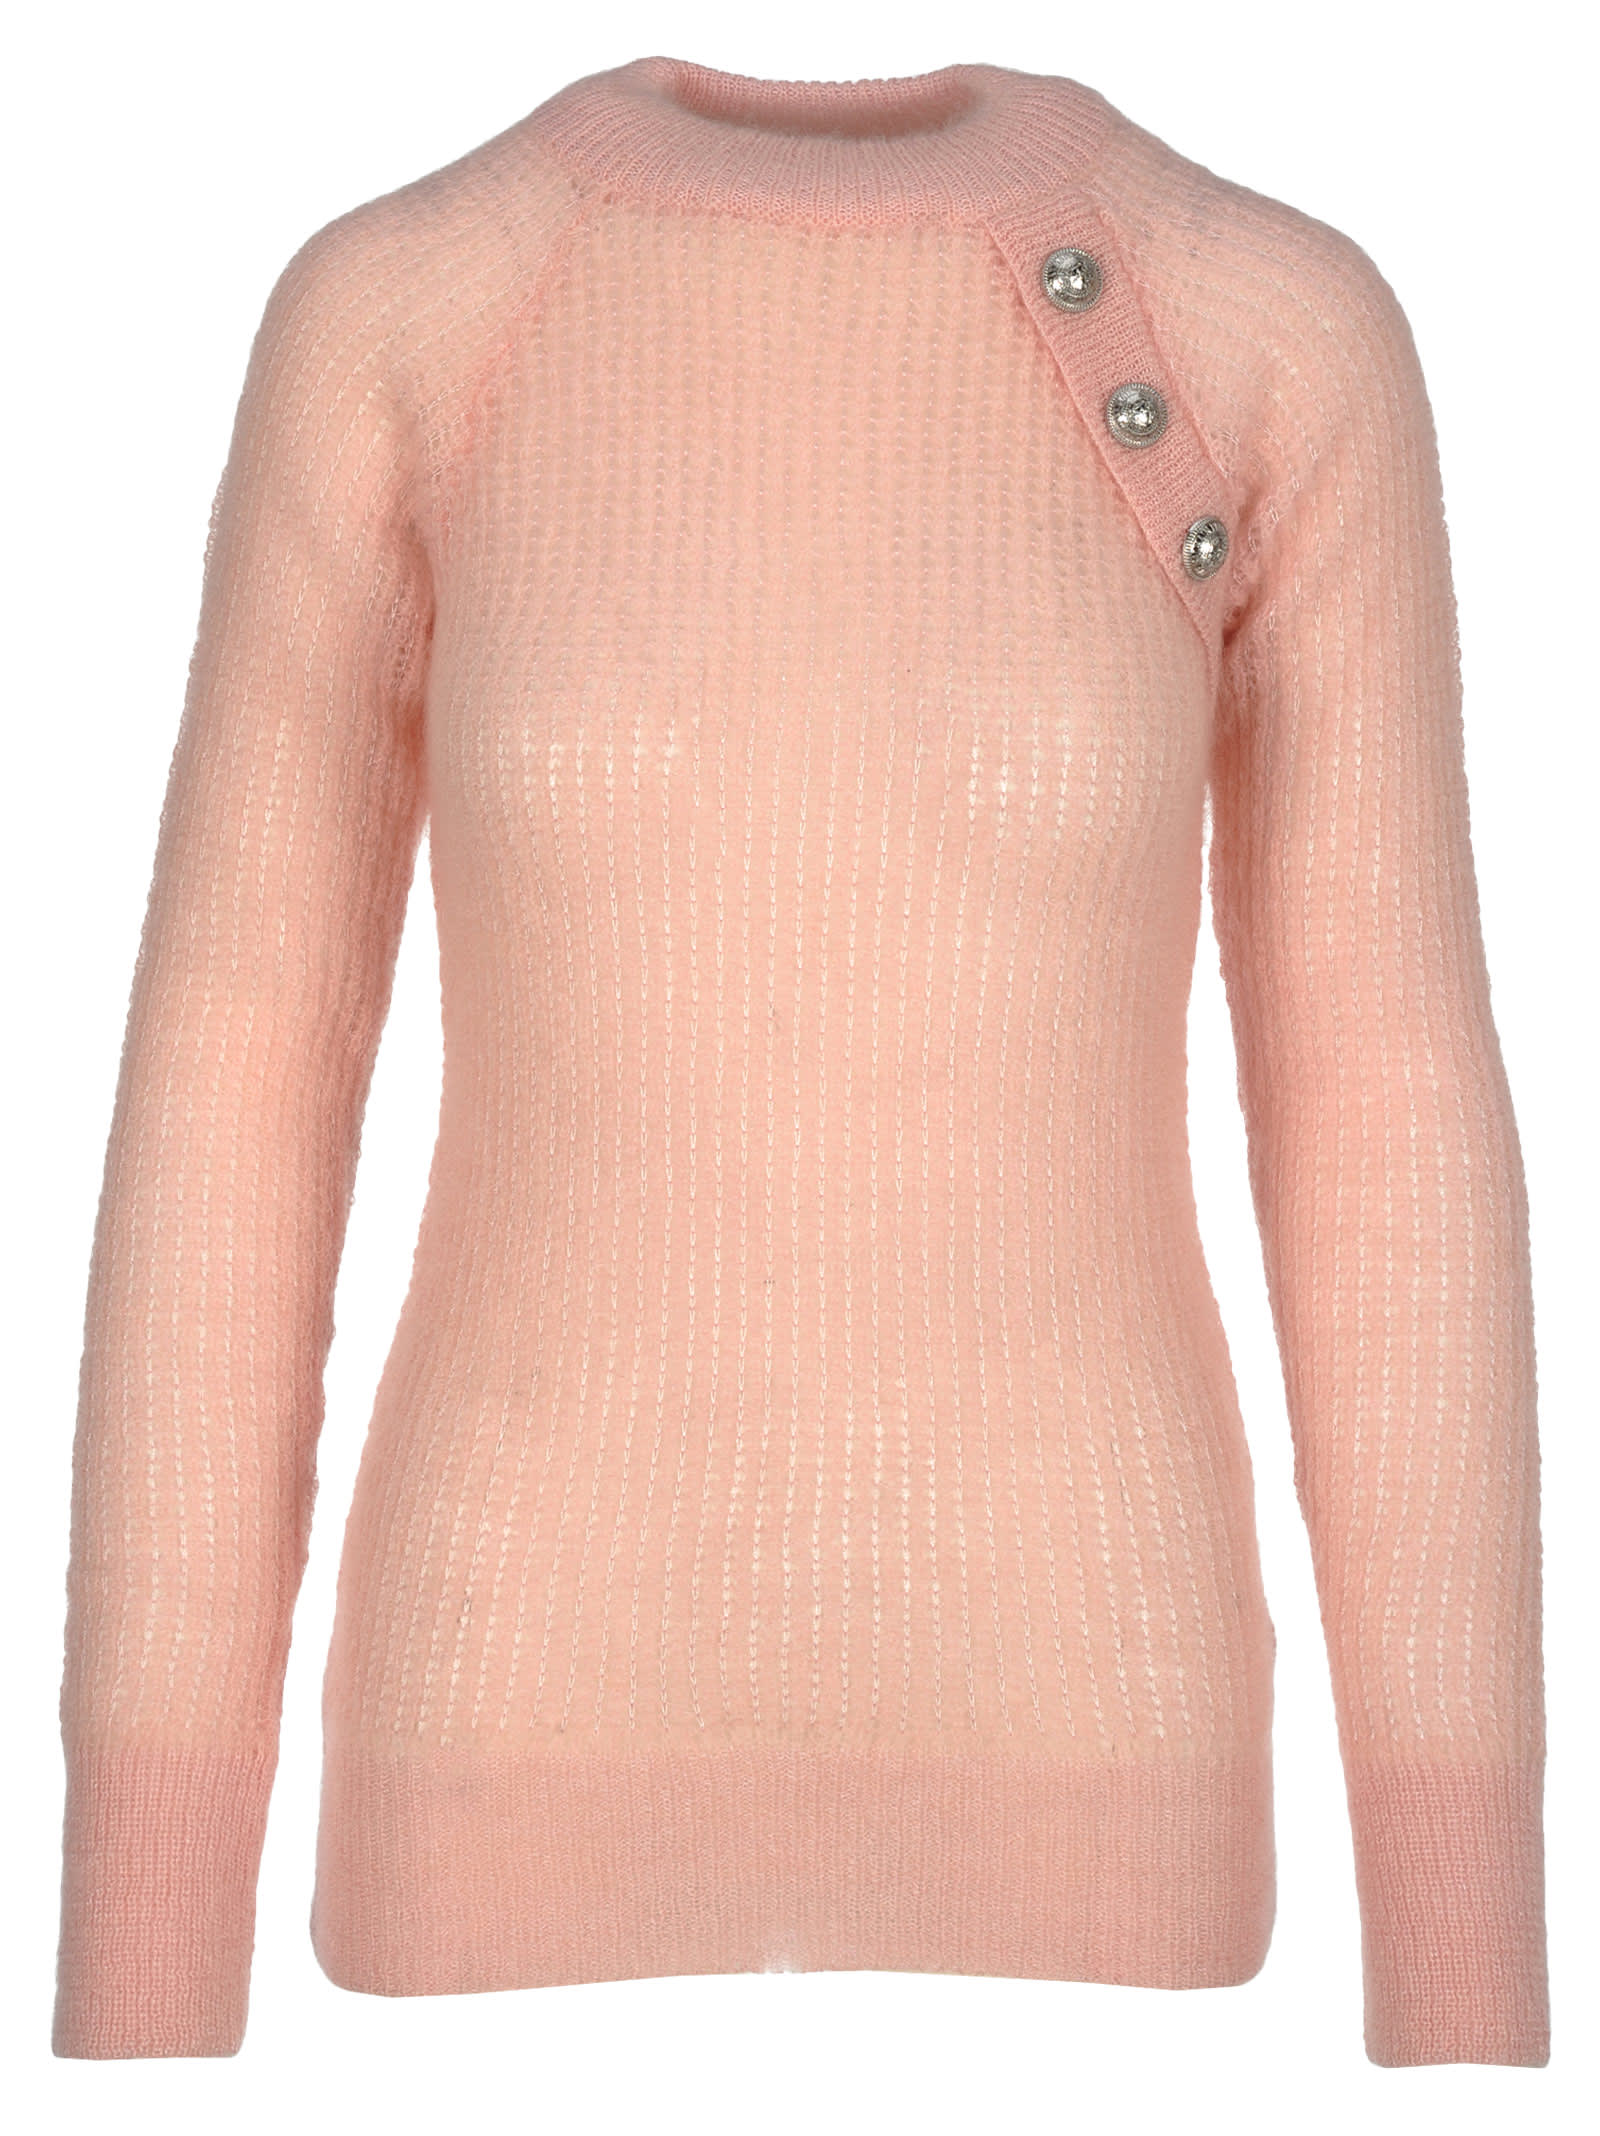 Balmain Sweater With Button Details In Pink | ModeSens